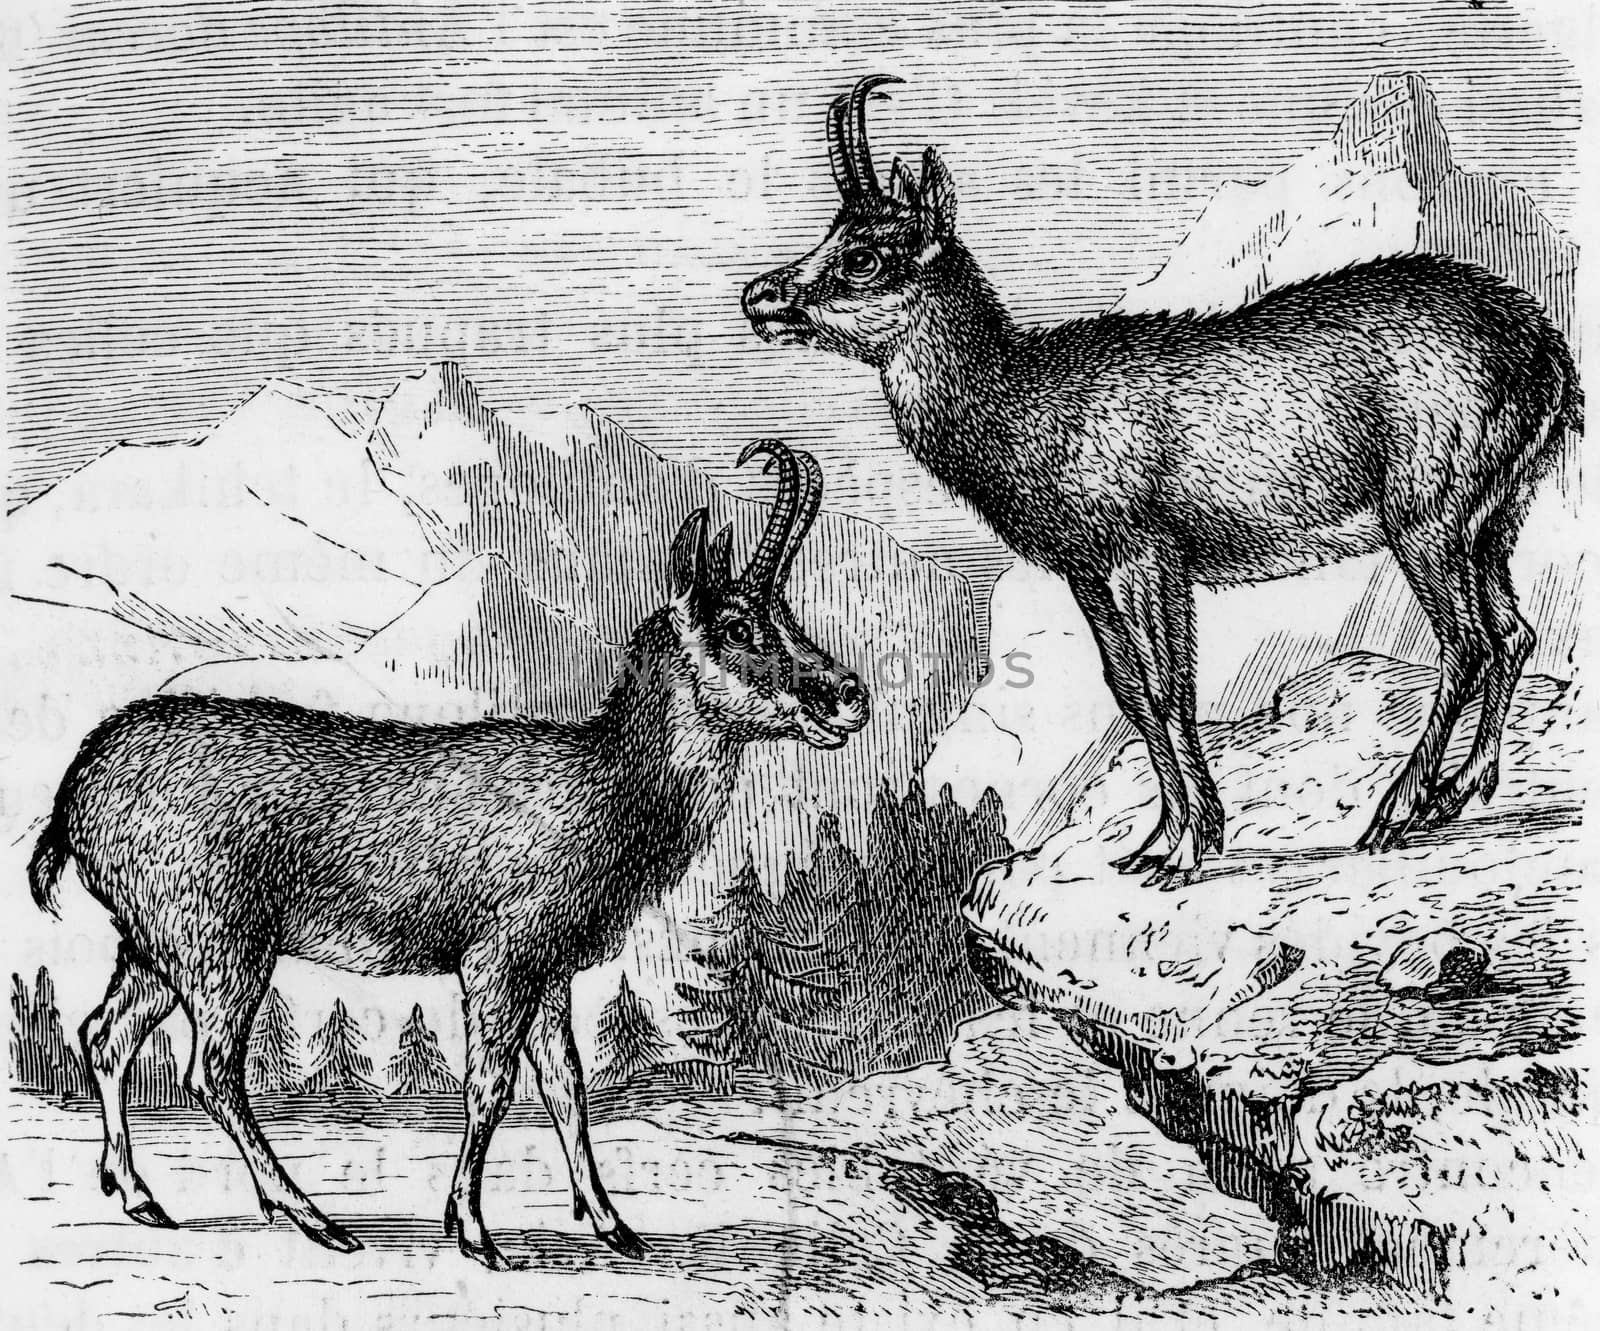 Chamois, vintage engraved illustration. From Zoology Elements from Paul Gervais.
